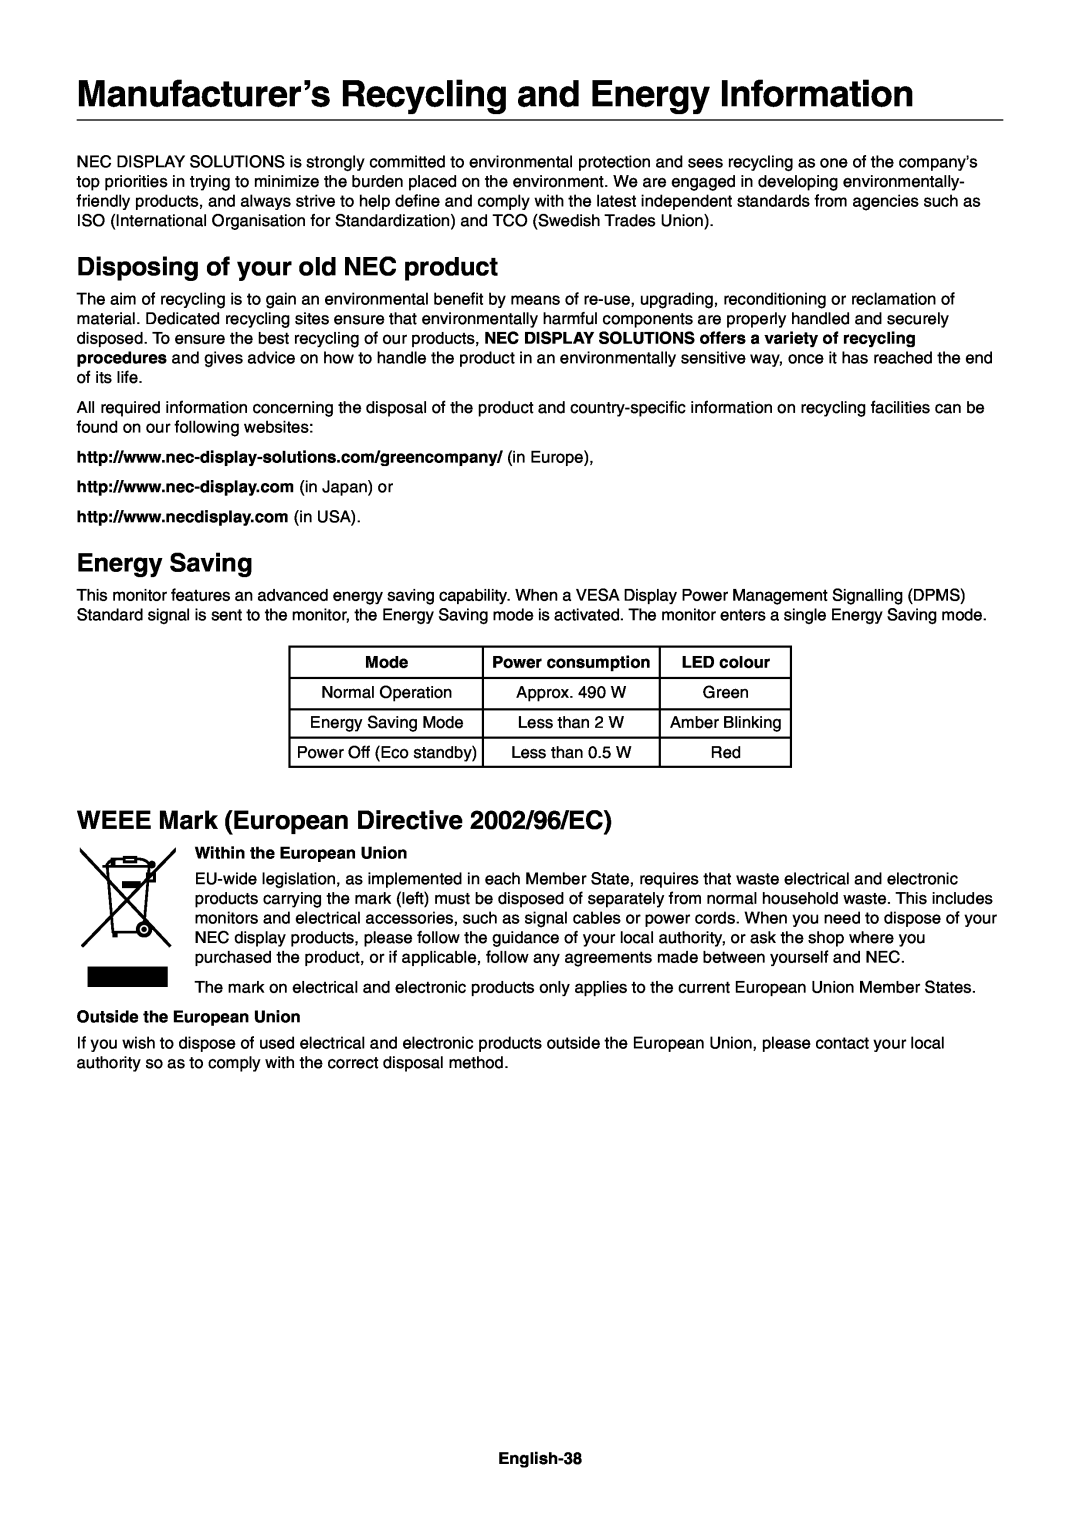 NEC MULTISYNC X462HB Manufacturer’s Recycling and Energy Information, Disposing of your old NEC product, Energy Saving 